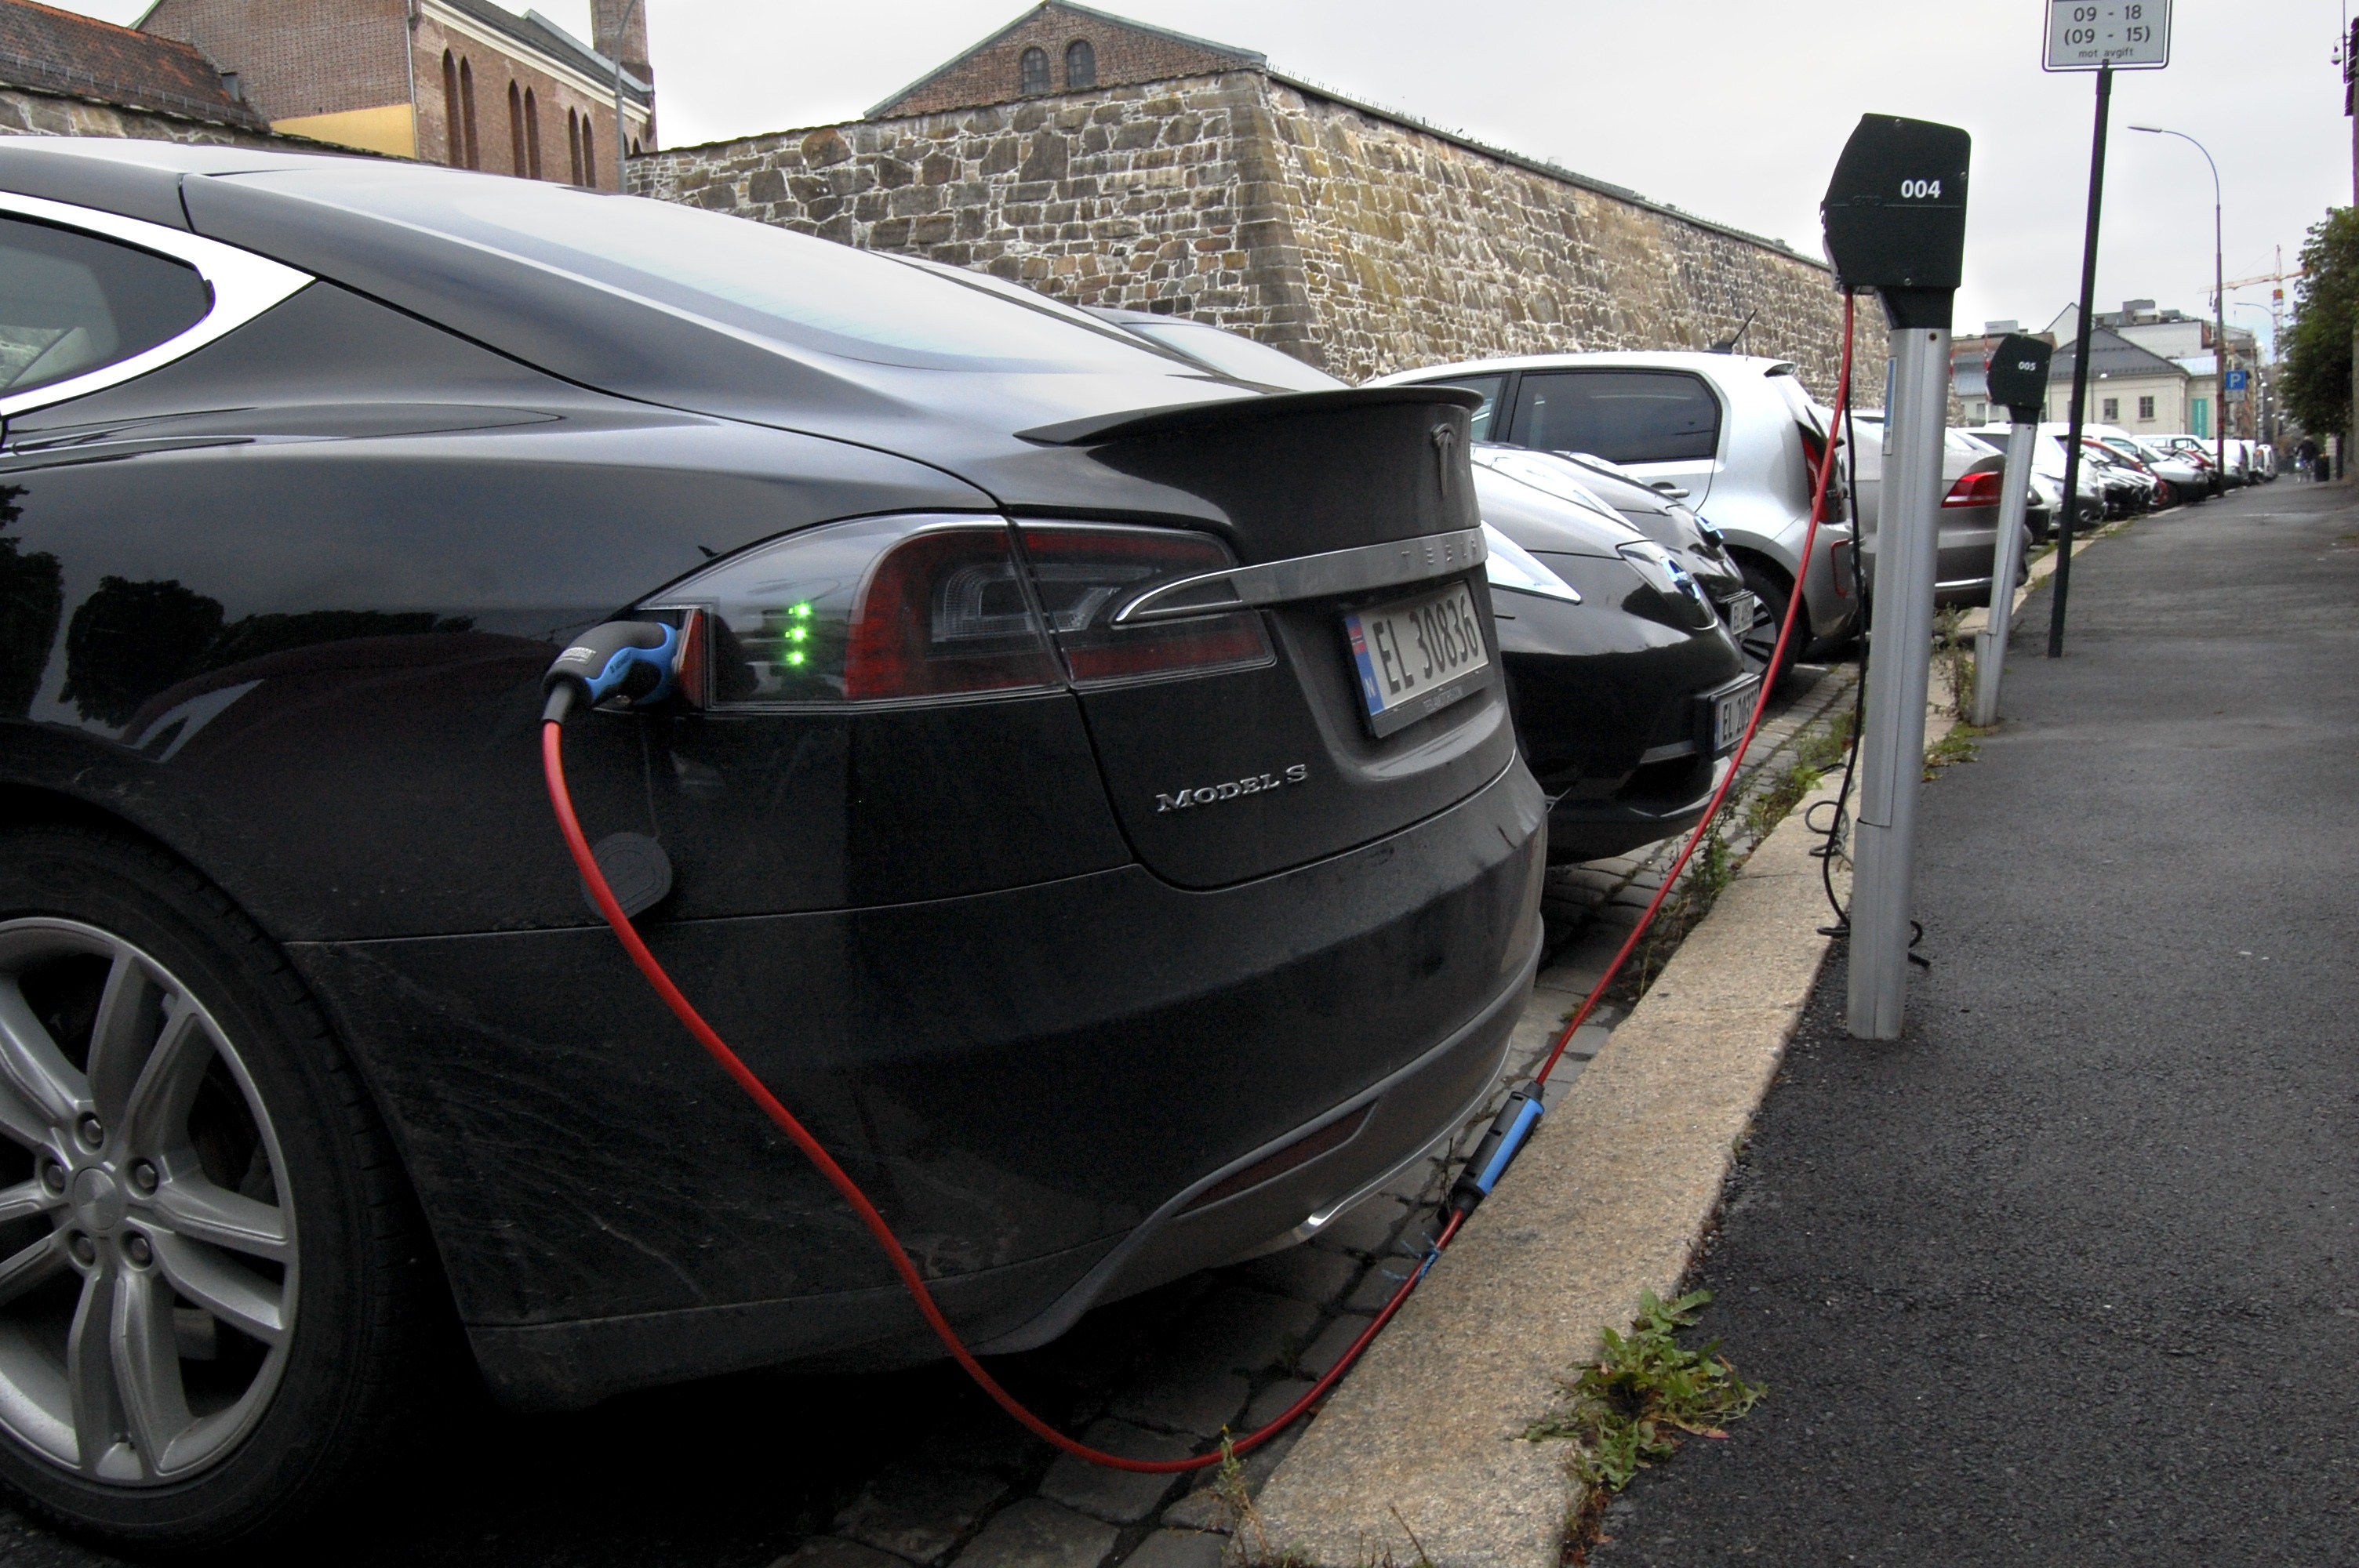 Cars are seen charging in free parking spaces for electric cars in central Oslo on Aug. 19, 2014. (Pierre-Henry Deshayes —AFP/Getty Images)